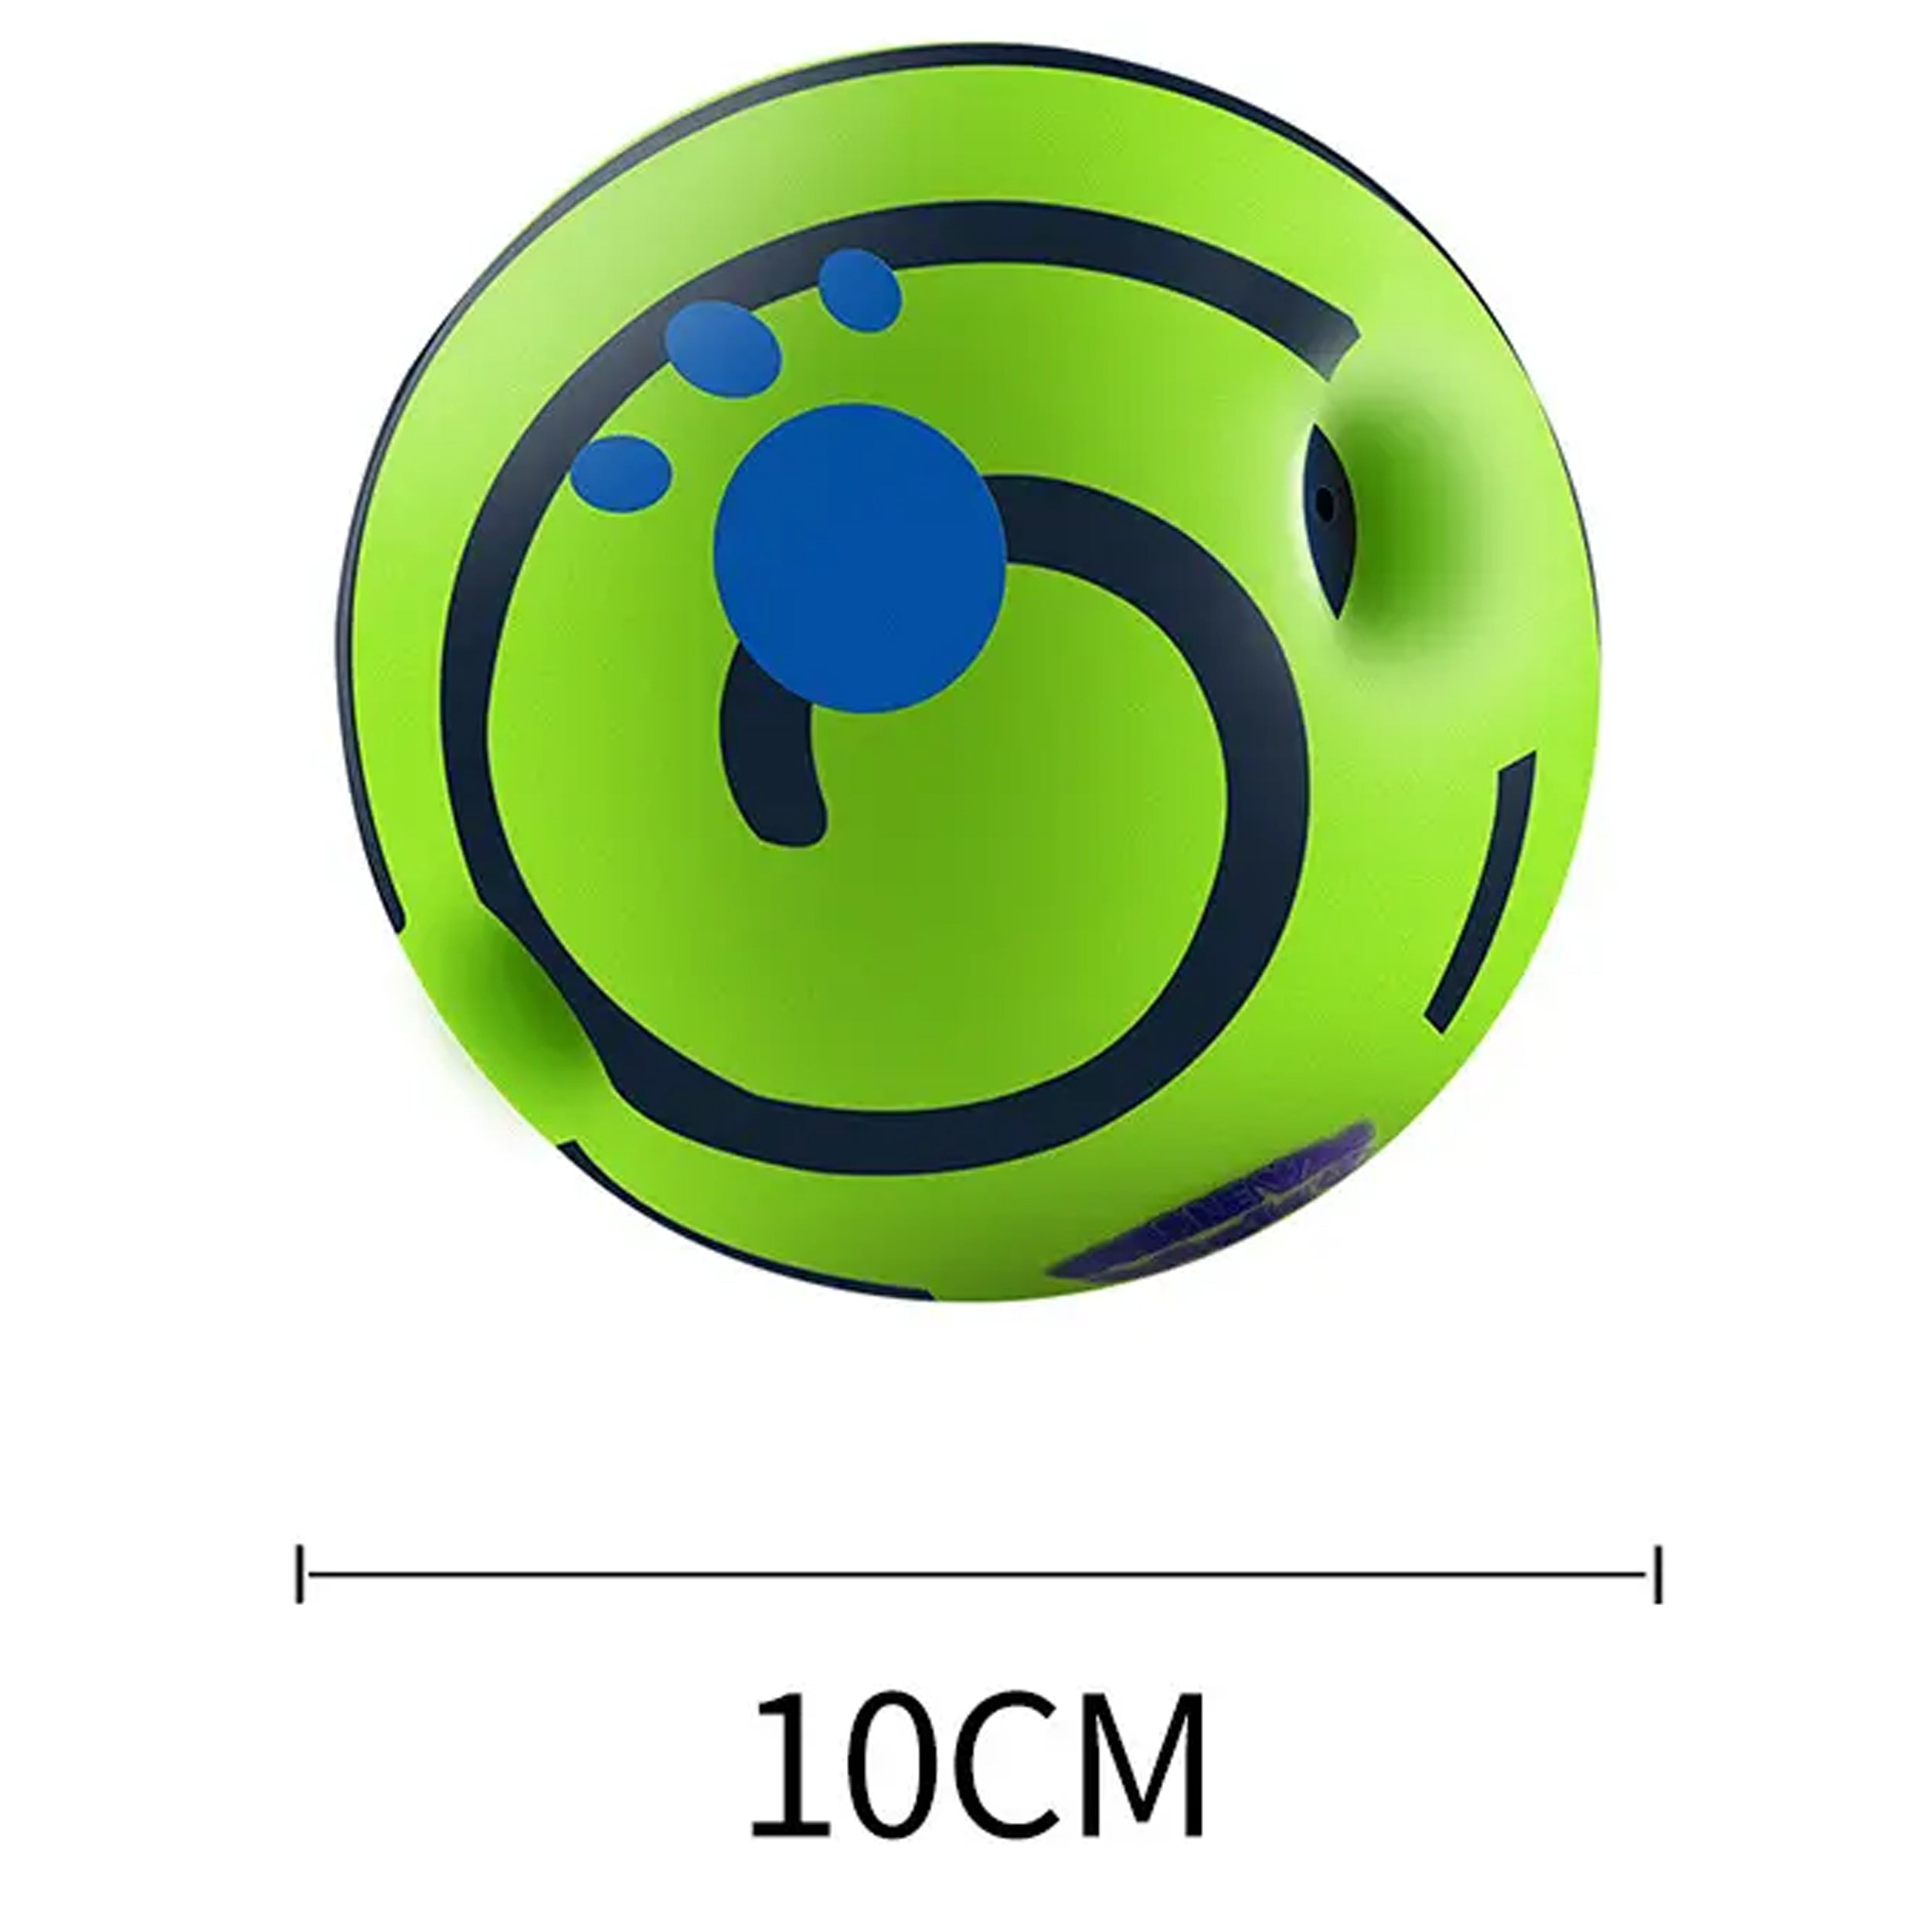 Eco Bouncy Ball Fetch Indoor Outdoor Green Interactive Latex PVC Natural Rubber Toy